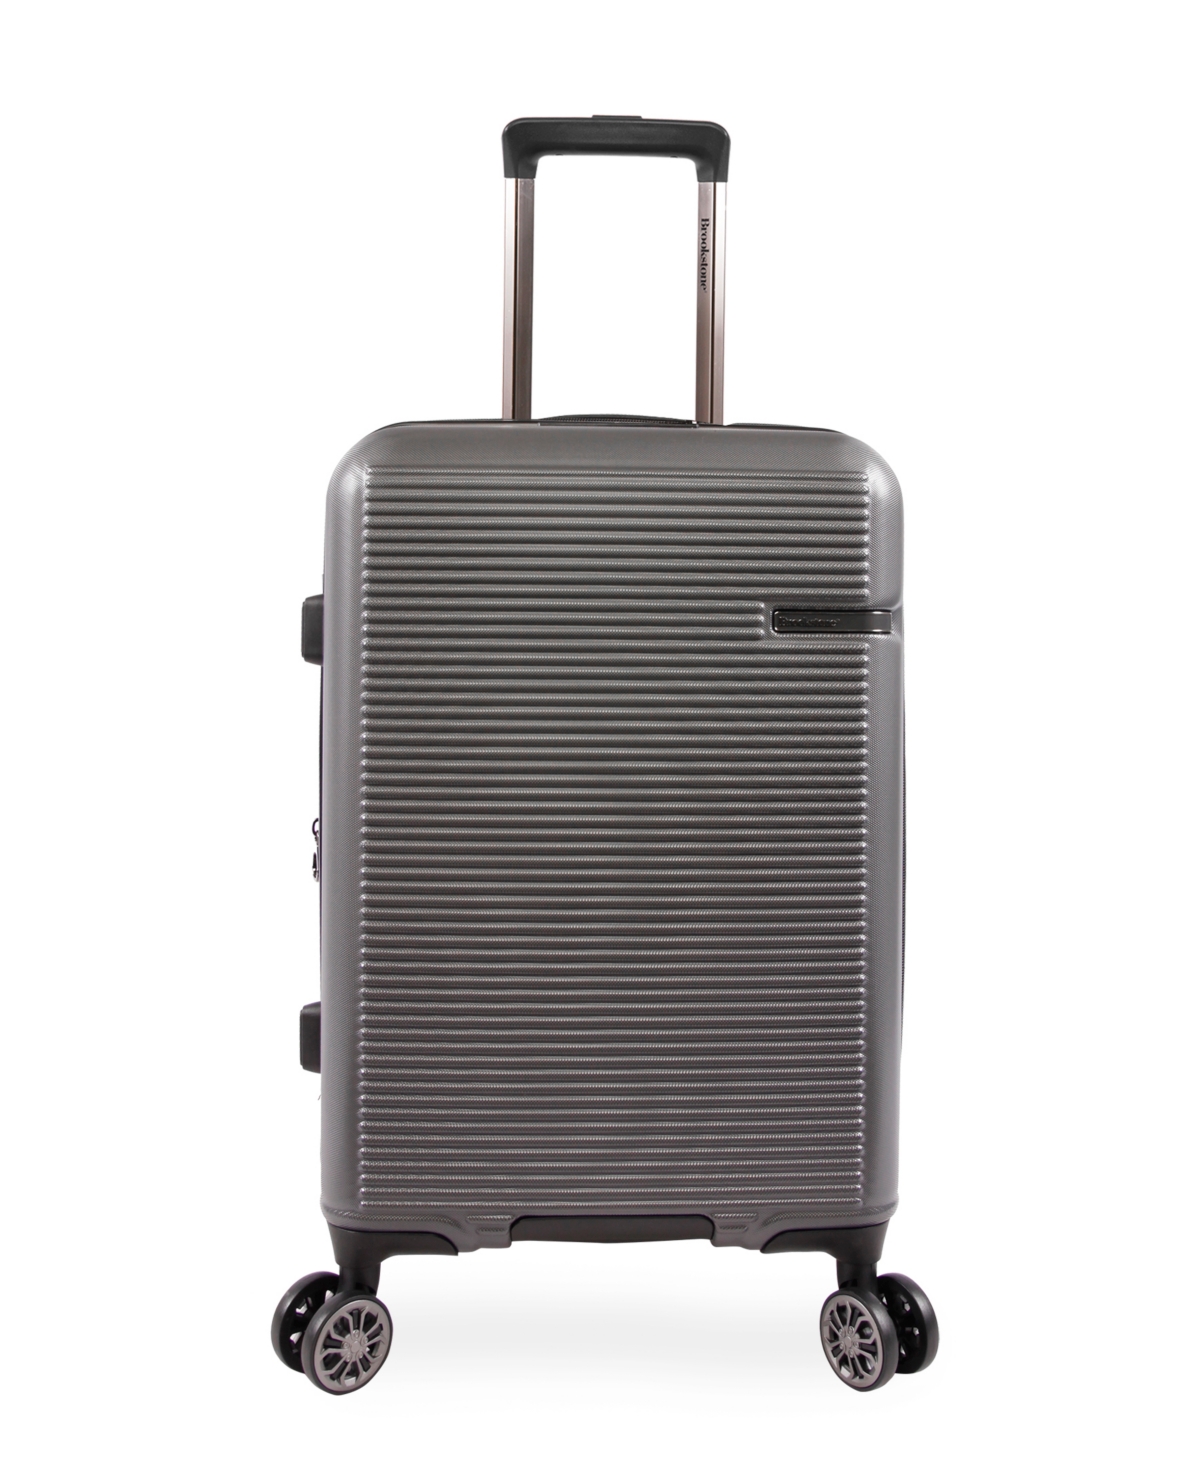 Nelson 21" Hardside Carry-On Luggage with Charging Port - Plum